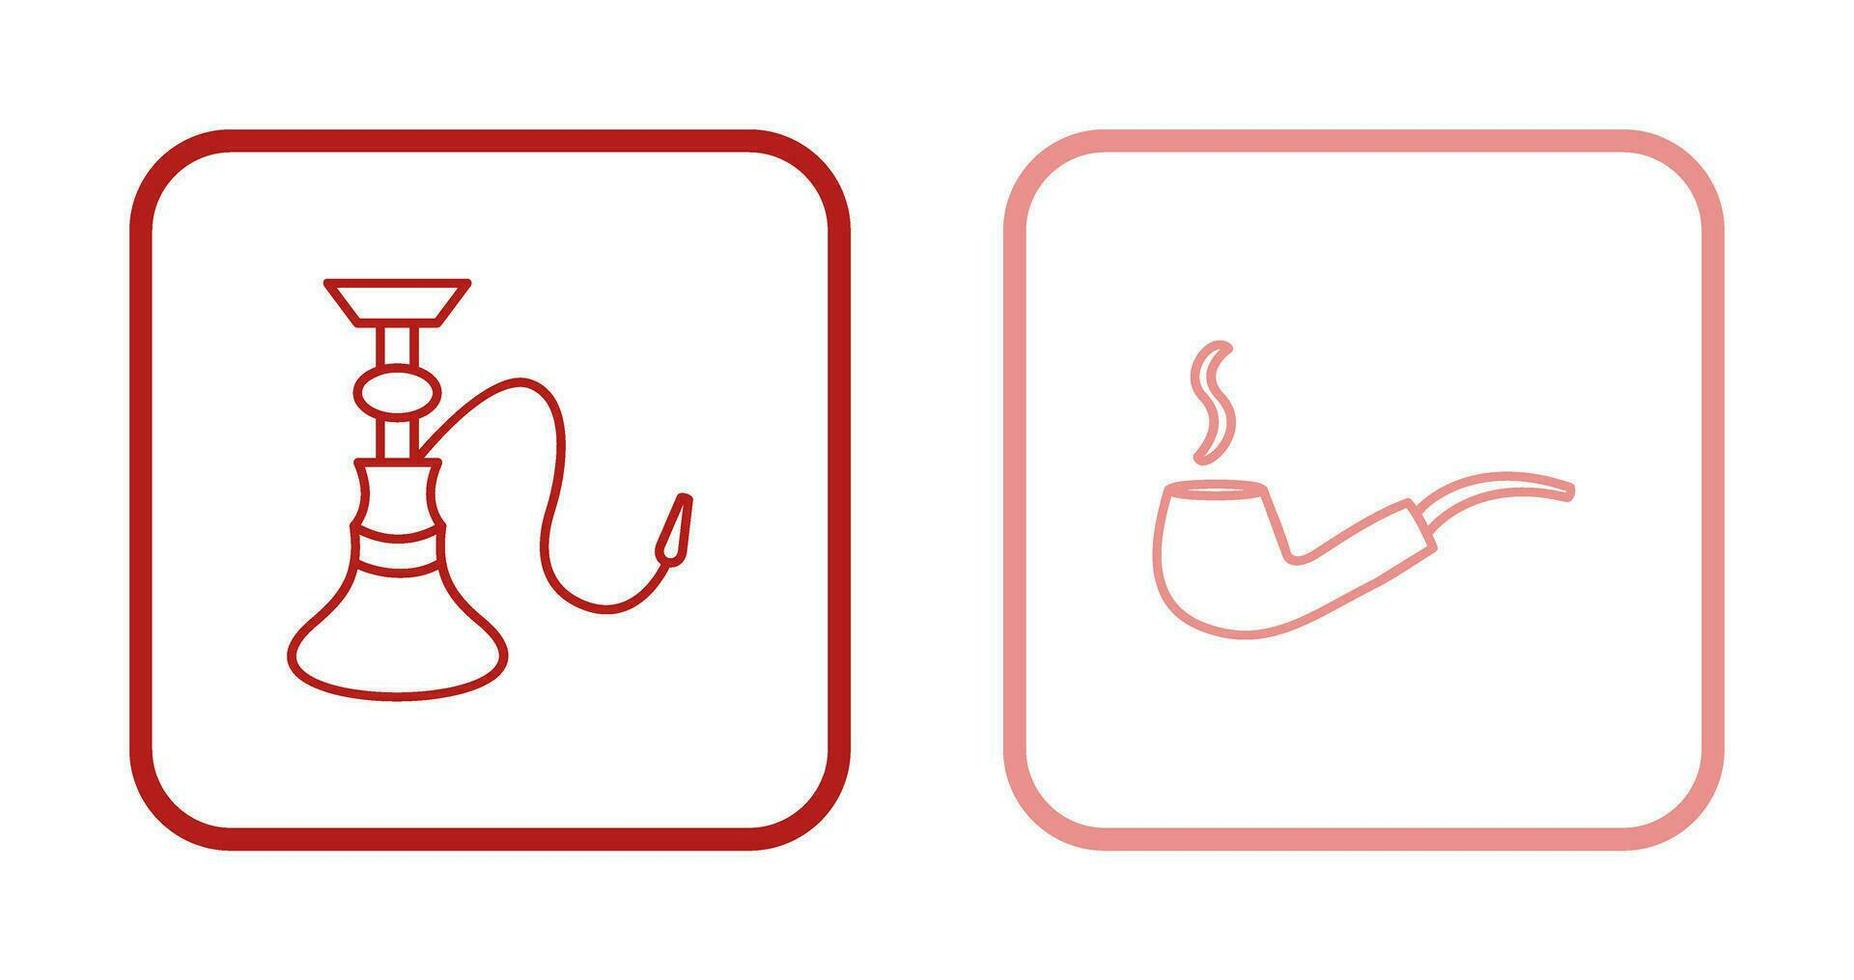 hookah and lit smoking pipe  Icon vector